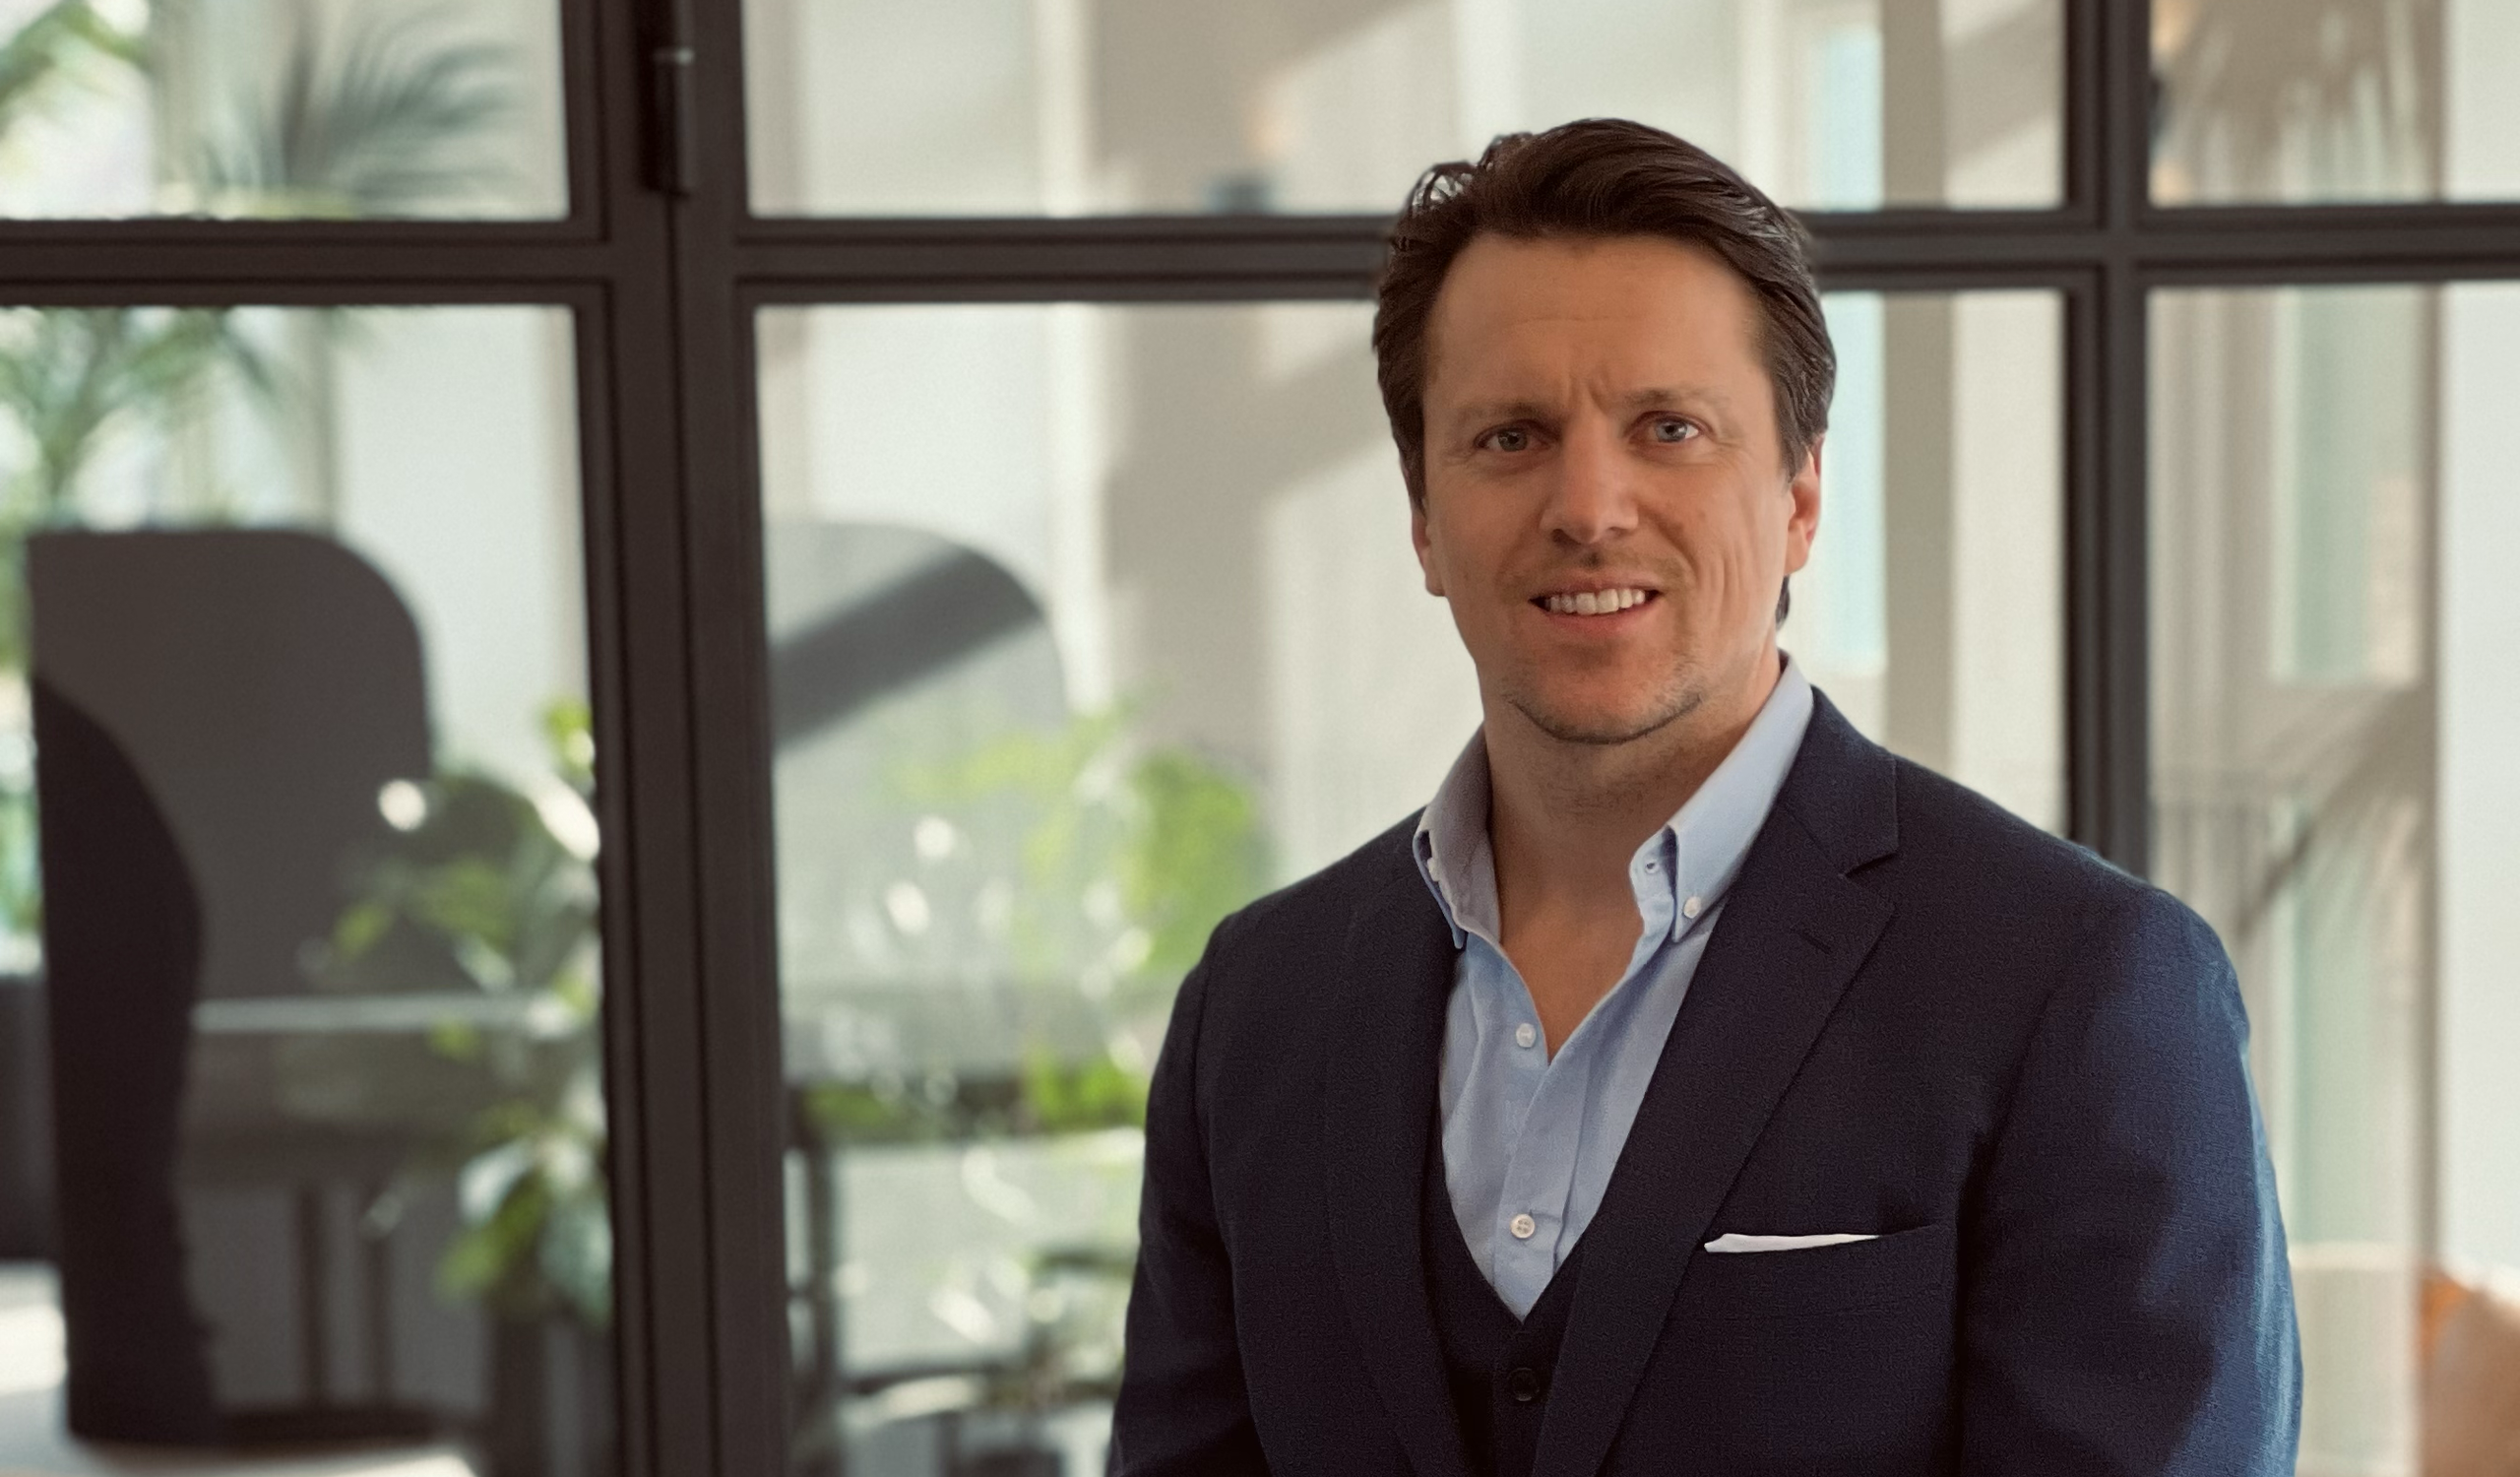 iZafe Group’s CEO Anders Segerström acquires an additional 208,333 shares.